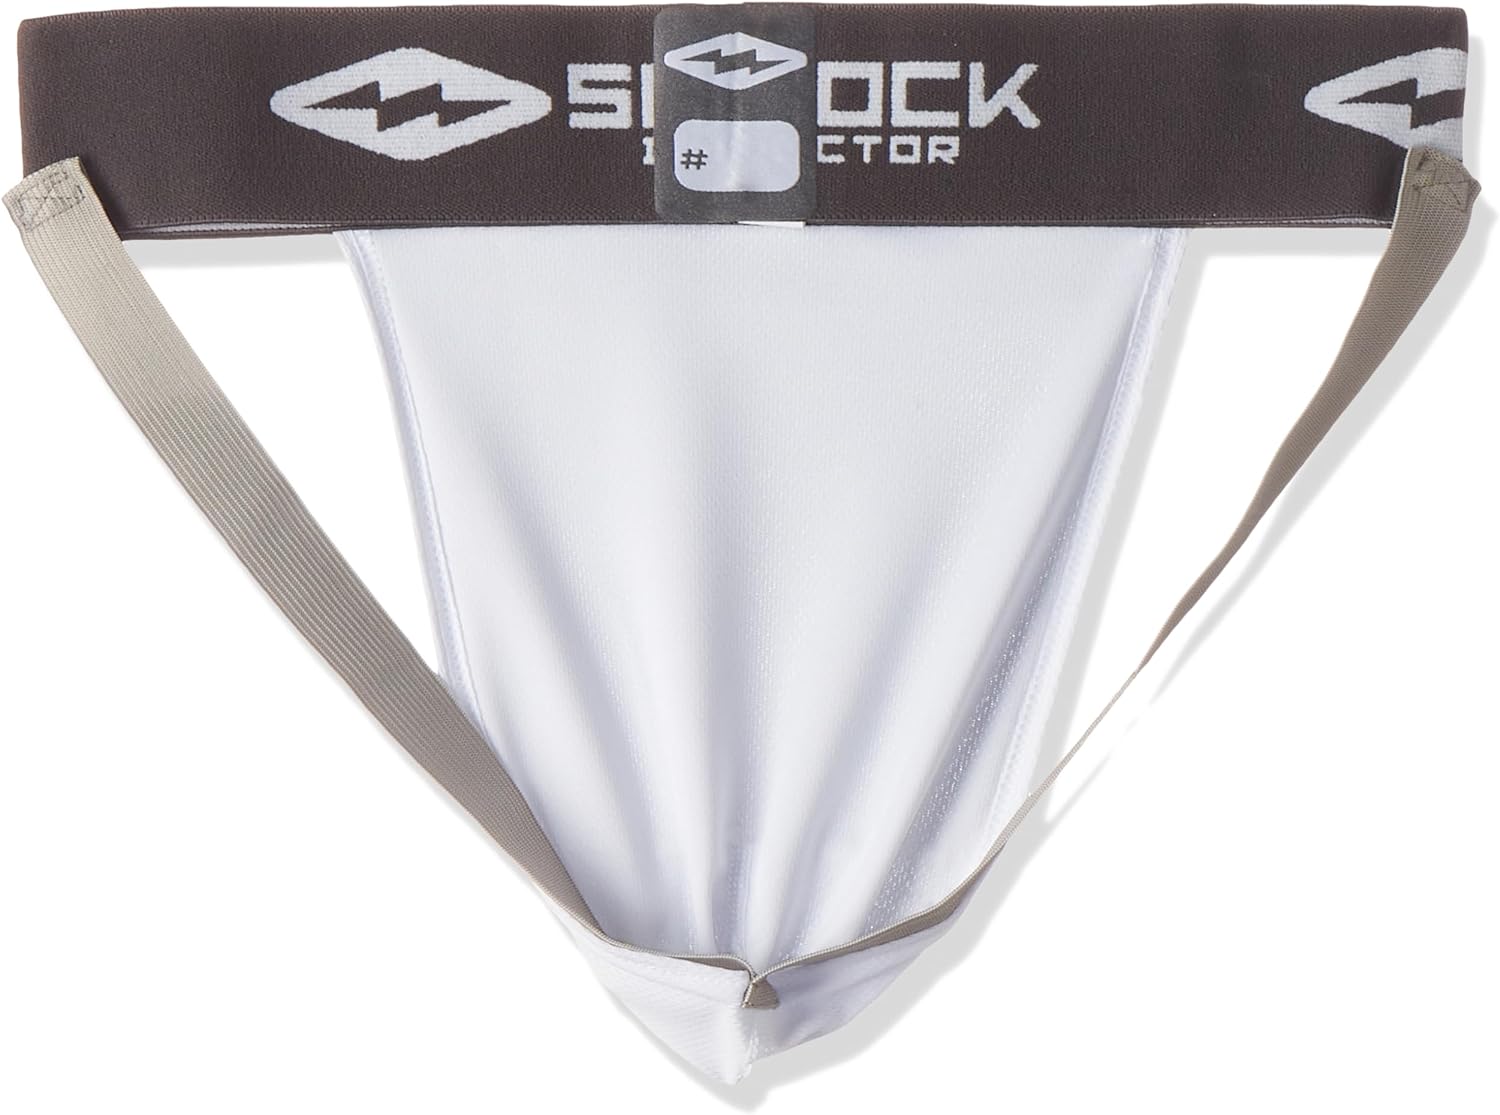 Shock Doctor Protective